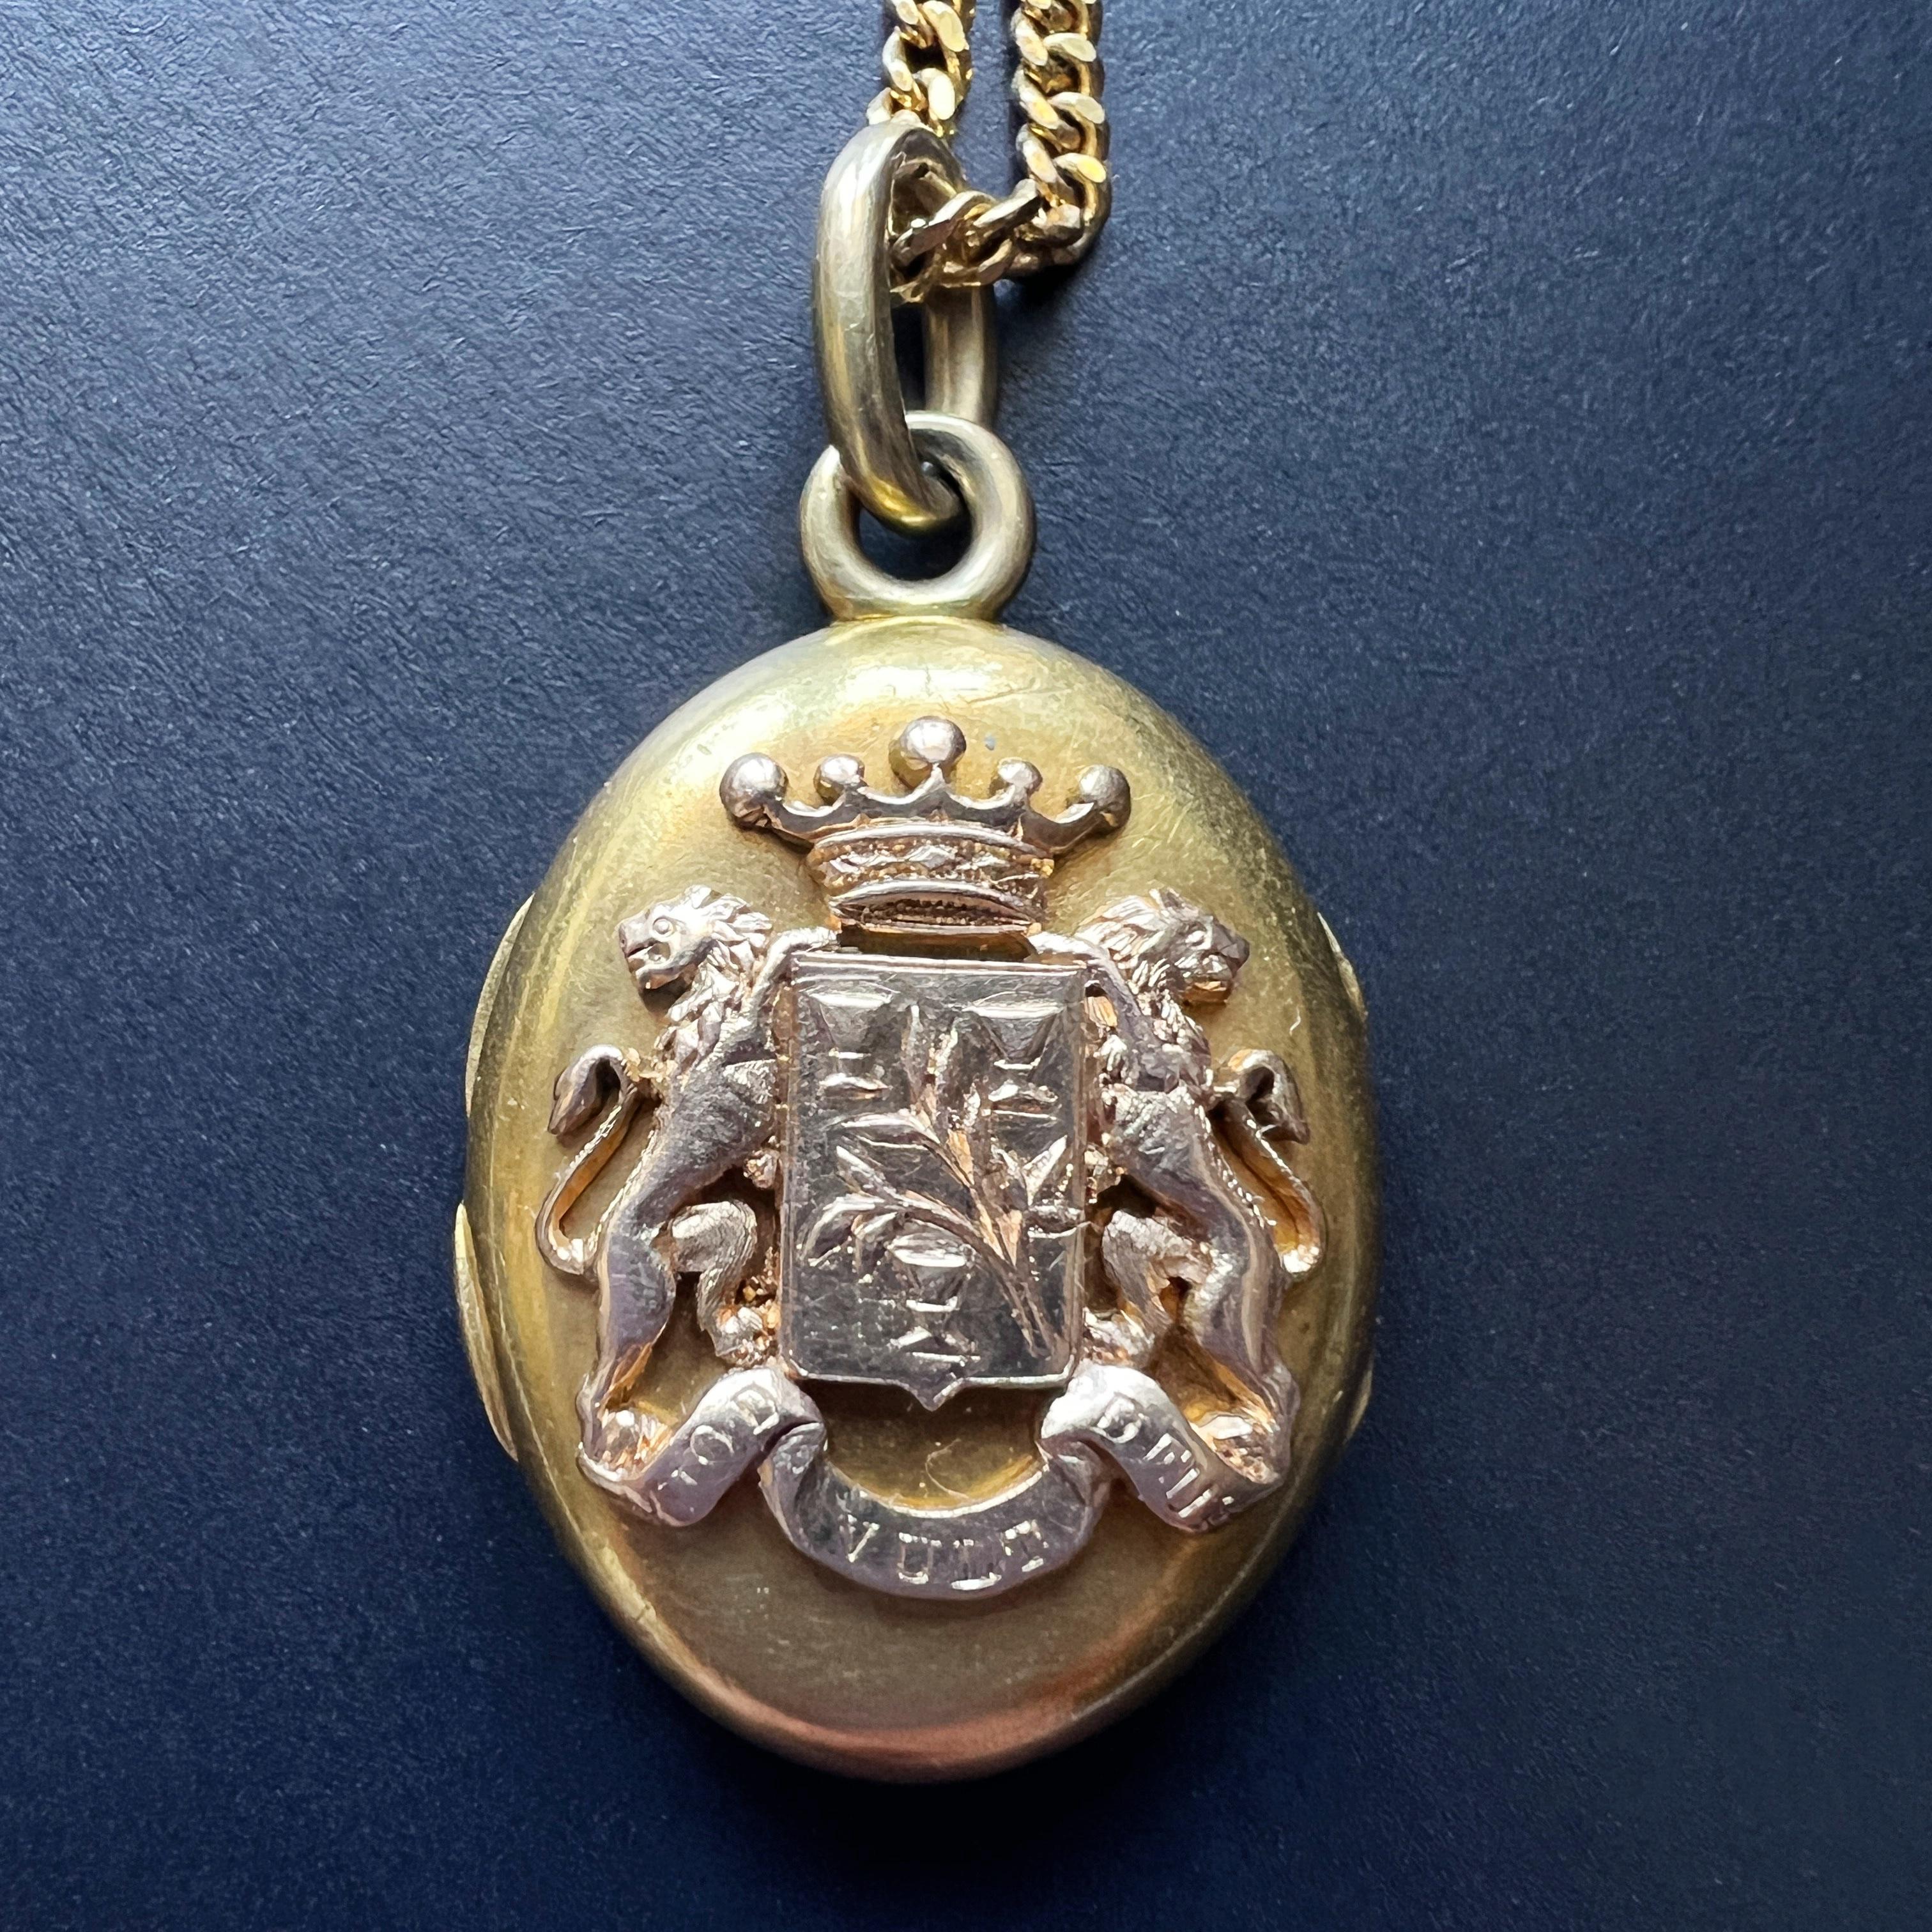 Step back in time with this rare 19th-century locket pendant, a timeless treasure steeped in history and heraldry. Adorned with a beautiful coat of arms featuring two noble lions, a regal crown, delicate flowers and three triumphs, this exquisite